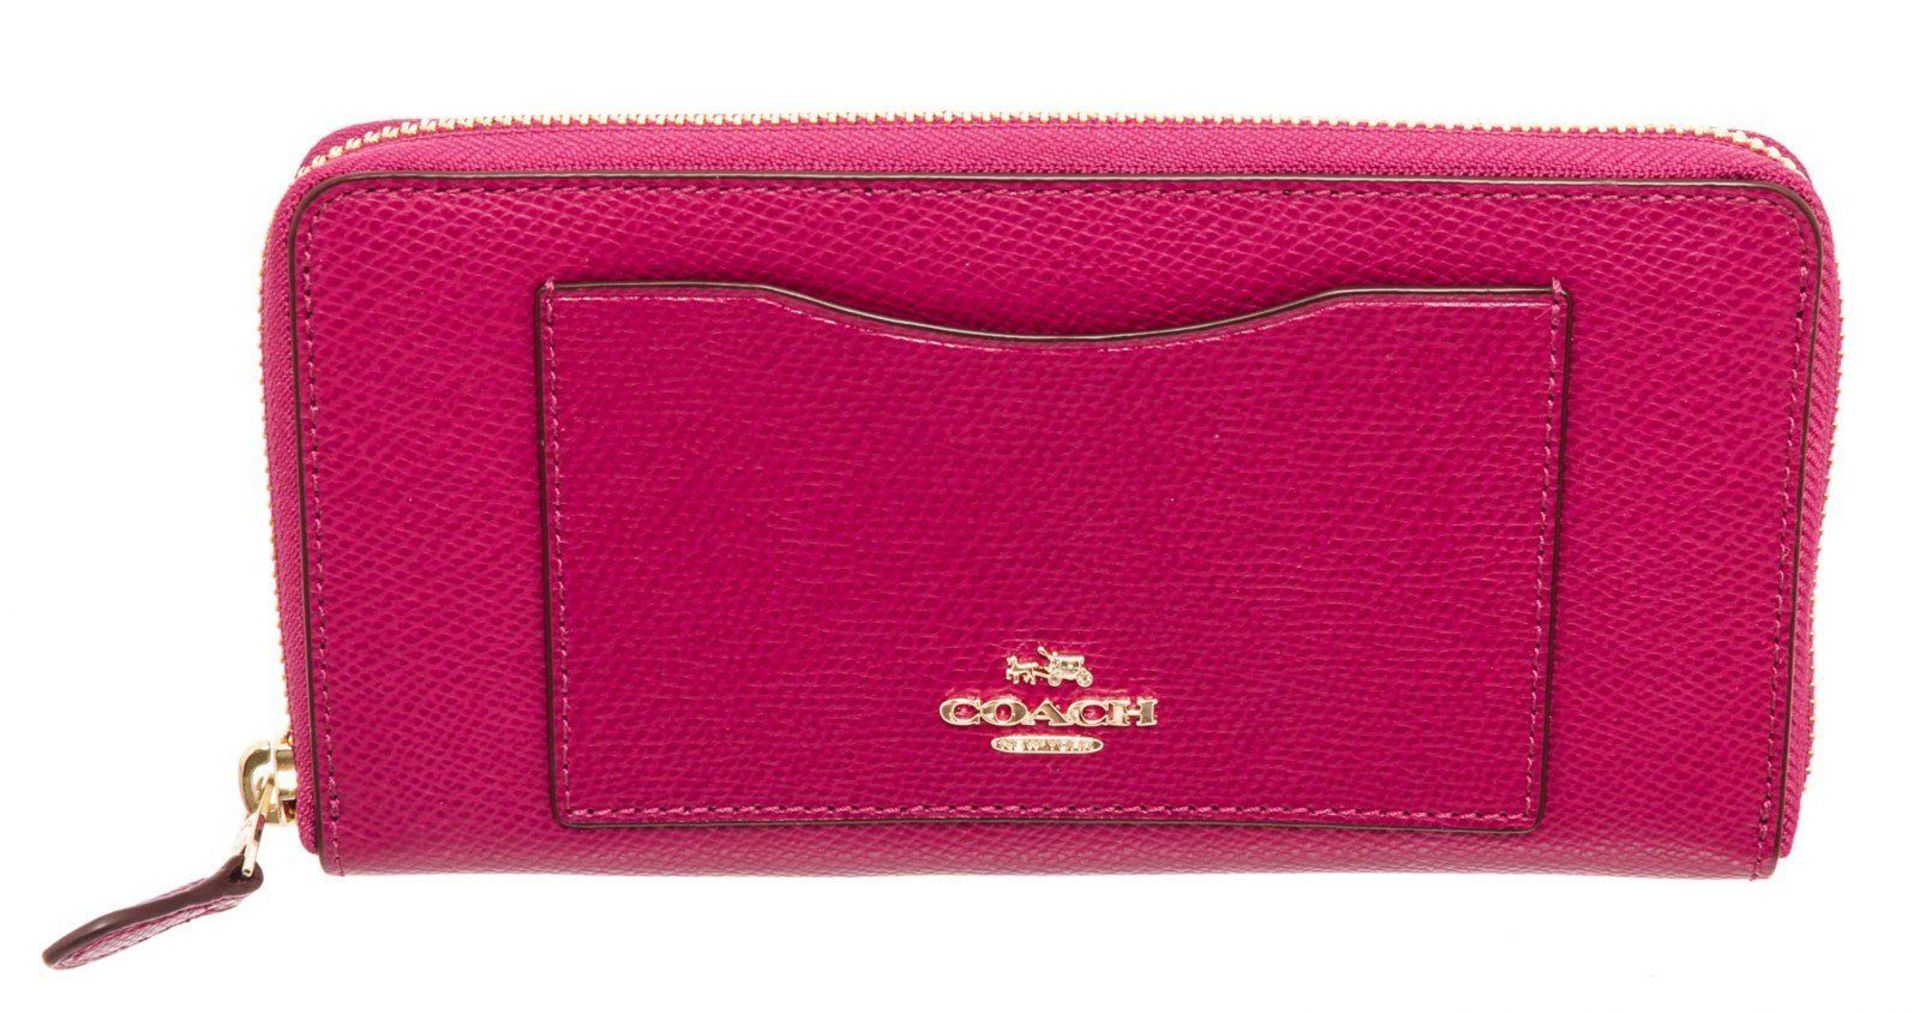 Coach Pink Leather Long Zippy Wallet